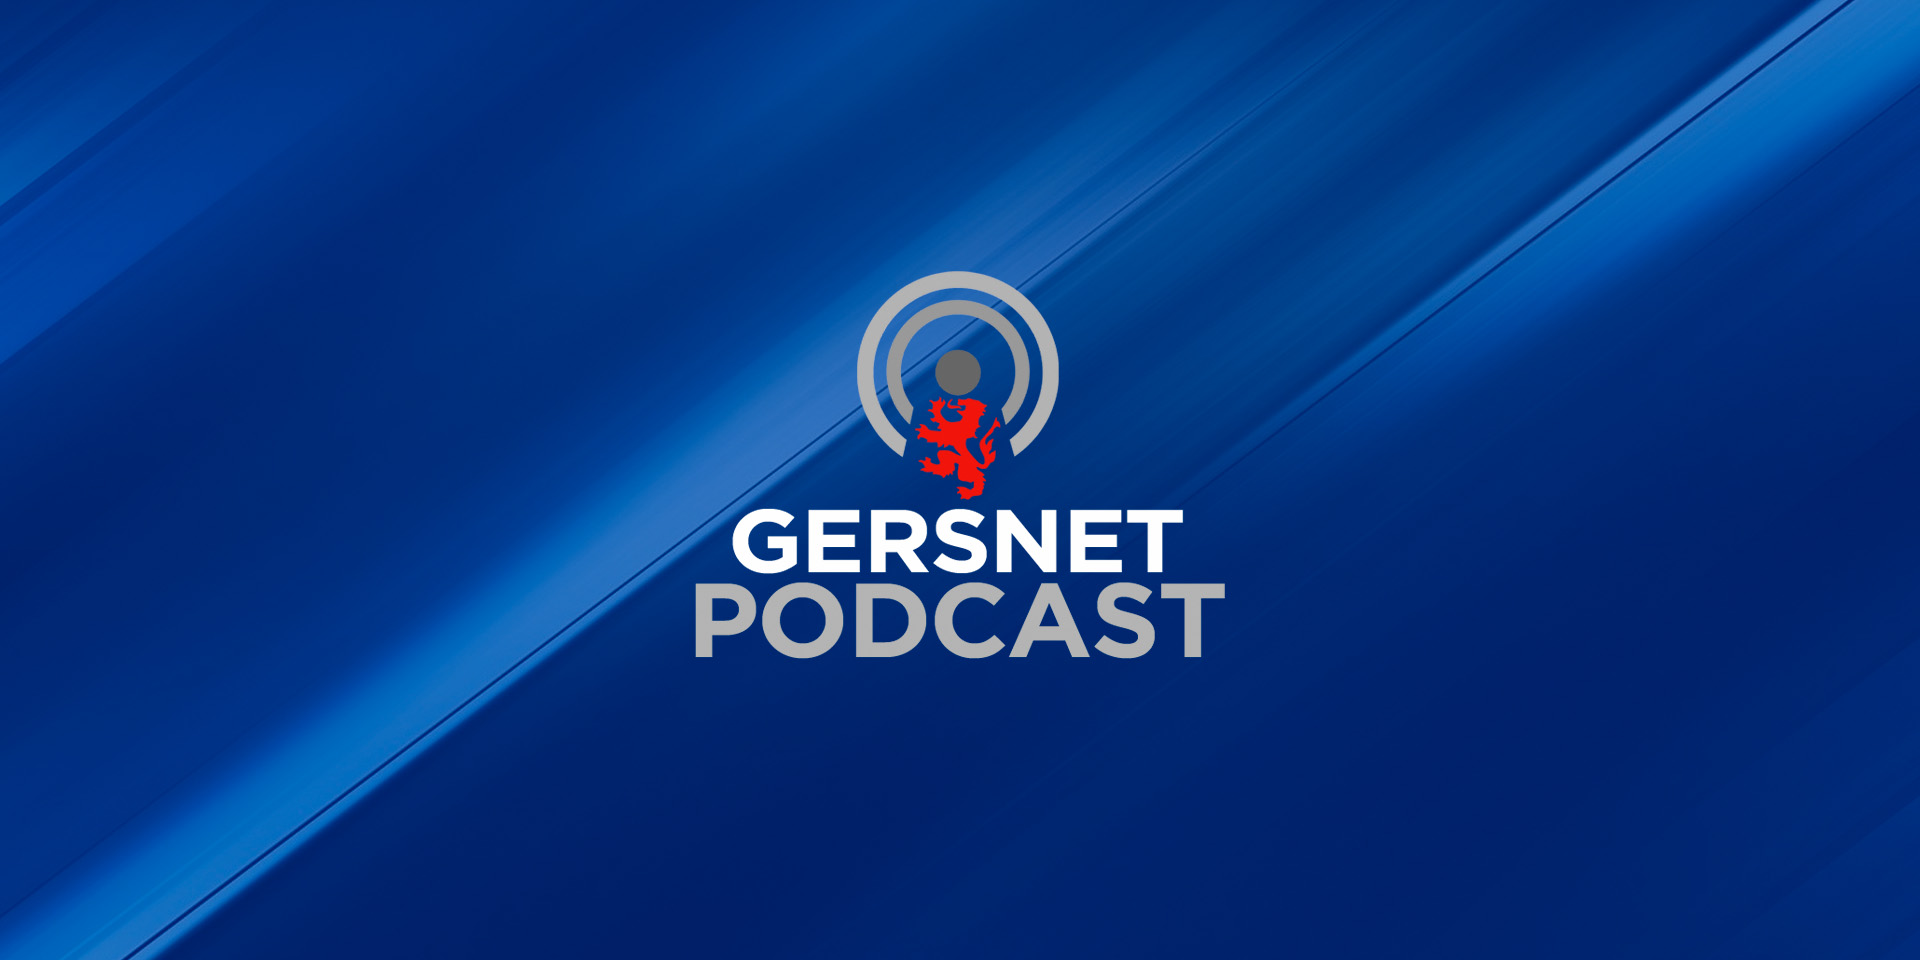 Gersnet Podcast 276 - Patience is a virtue v Livi